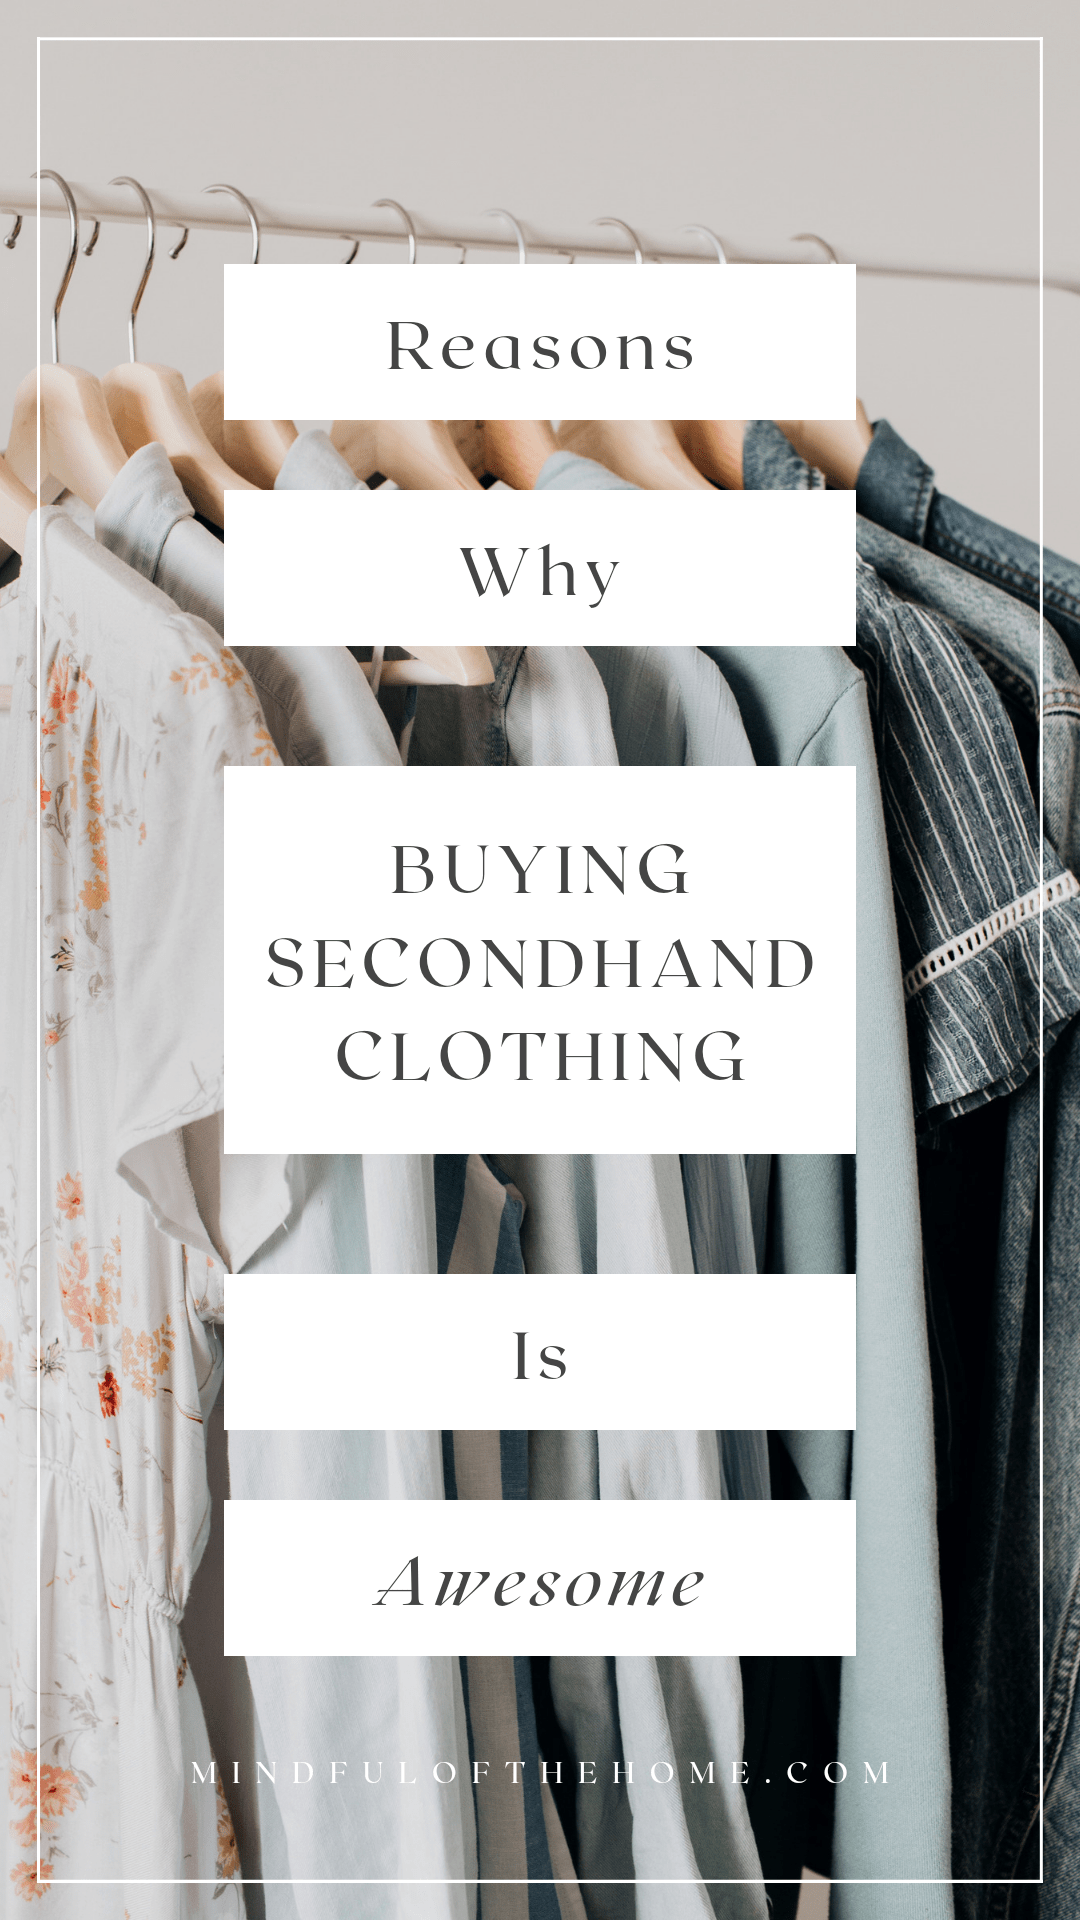 https://mindfulofthehome.com/wp-content/uploads/2021/06/reasons-why-buying-secondhand-clothing-is-awesome.png